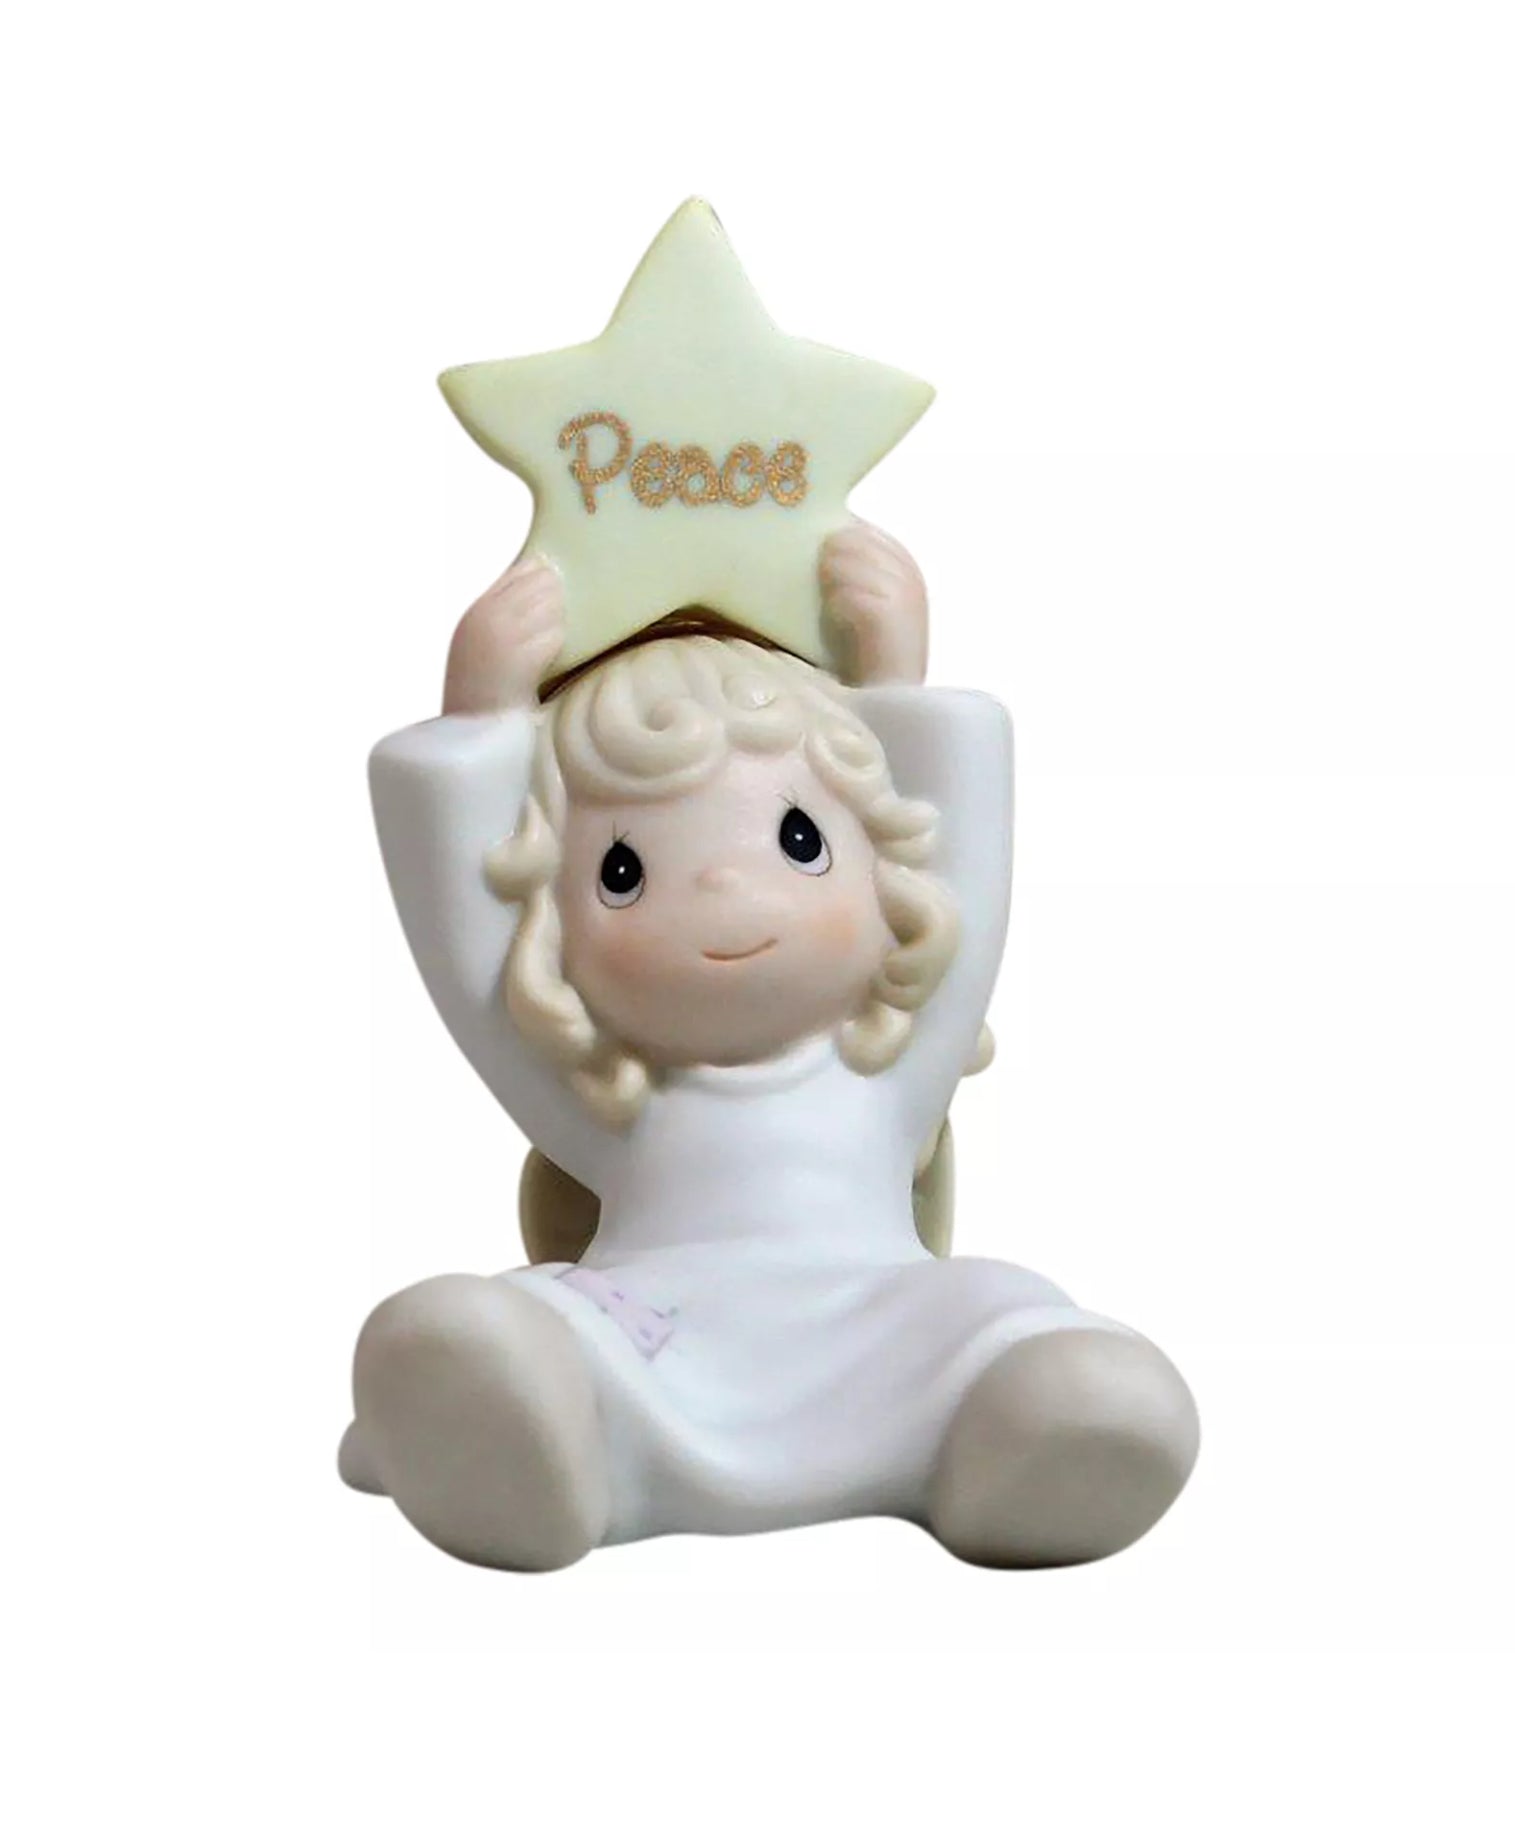 Hang On To That Holiday Feeling - Precious Moment Mini Nativity Figurine